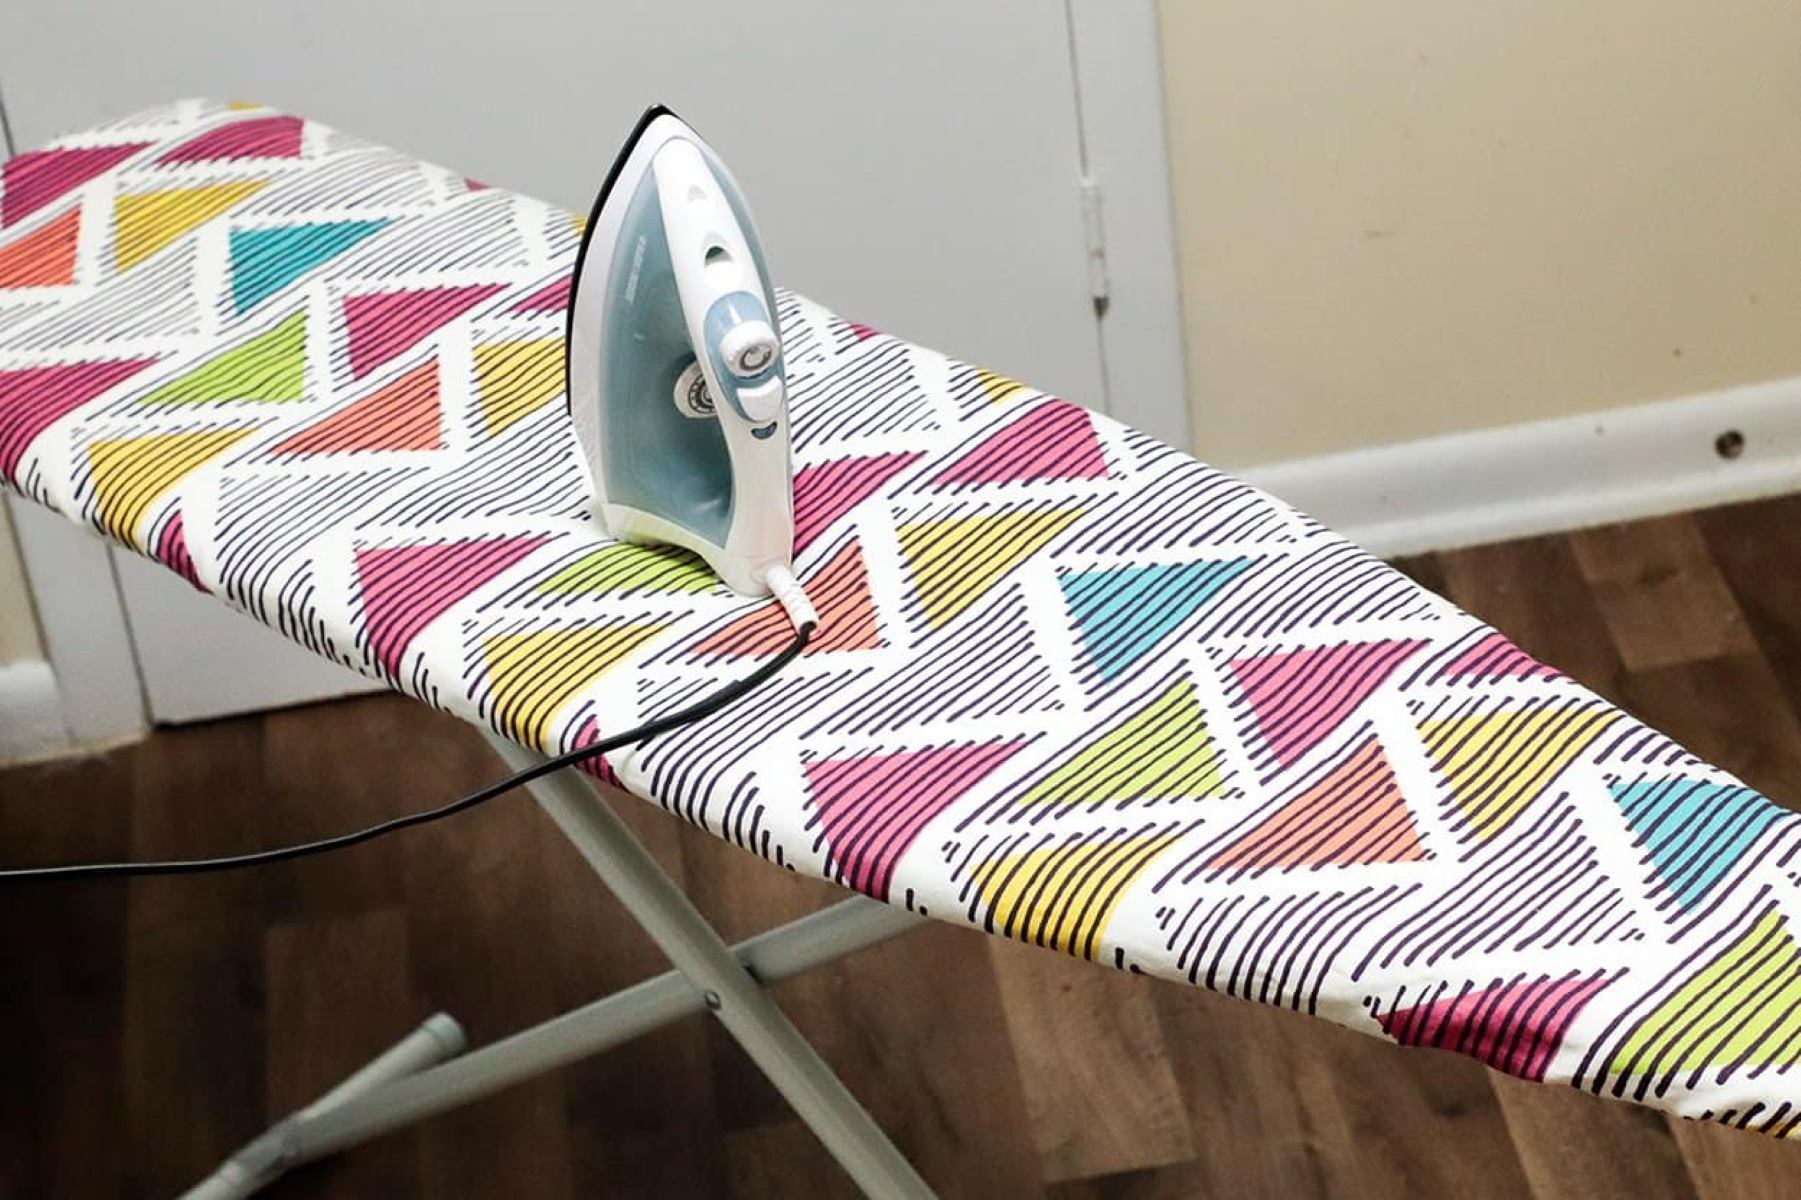 How To Measure For An Ironing Board Cover